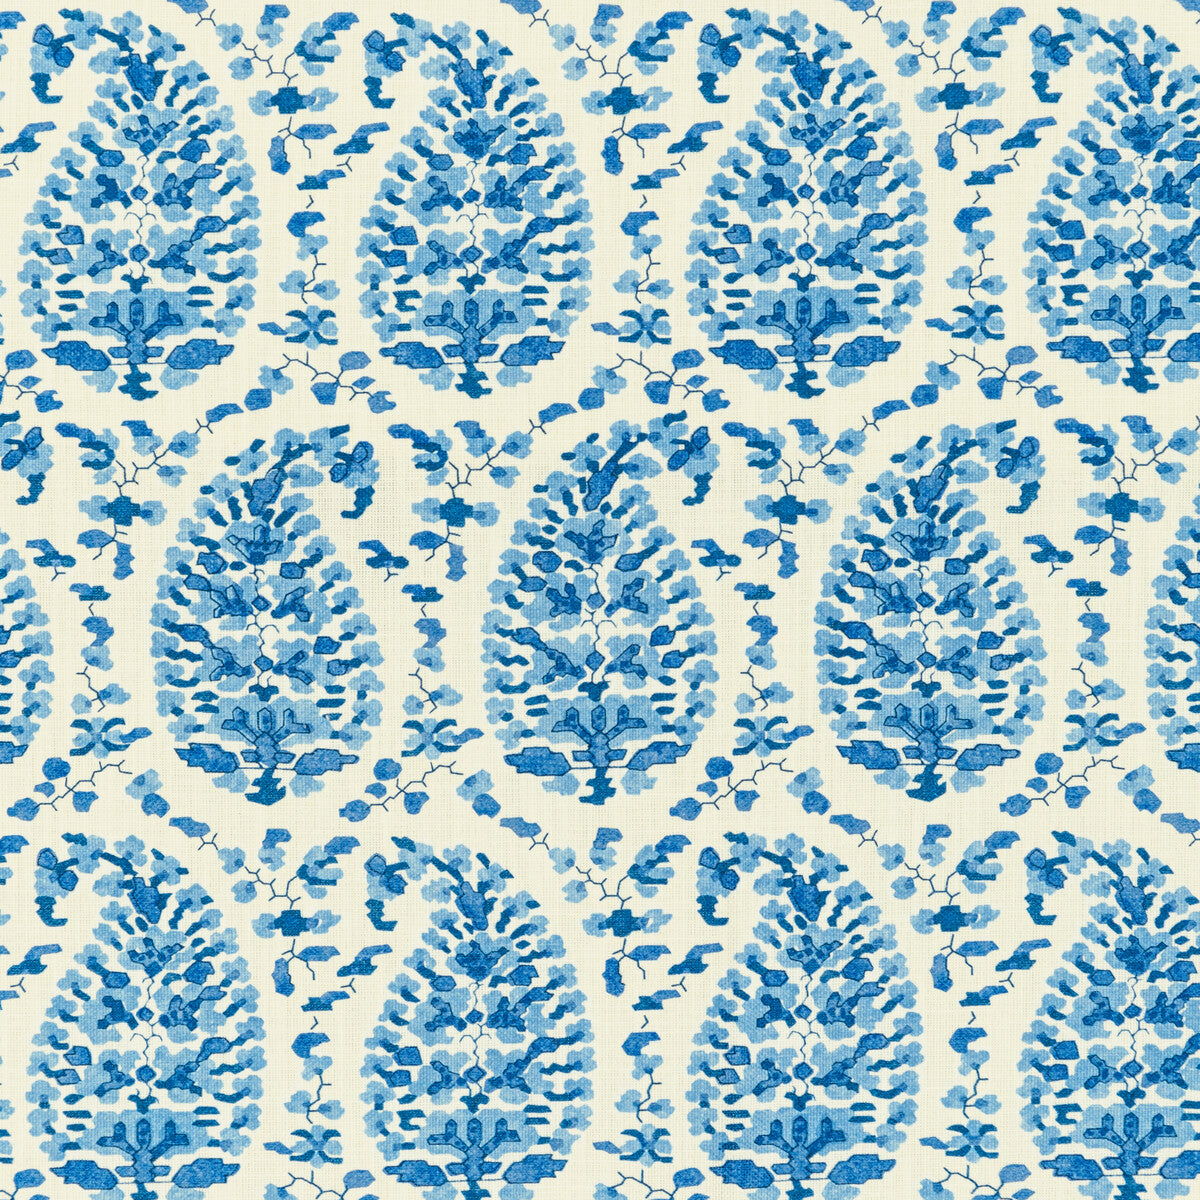 Rougier Print fabric in blue color - pattern 8020130.5.0 - by Brunschwig &amp; Fils in the En Vacances II collection